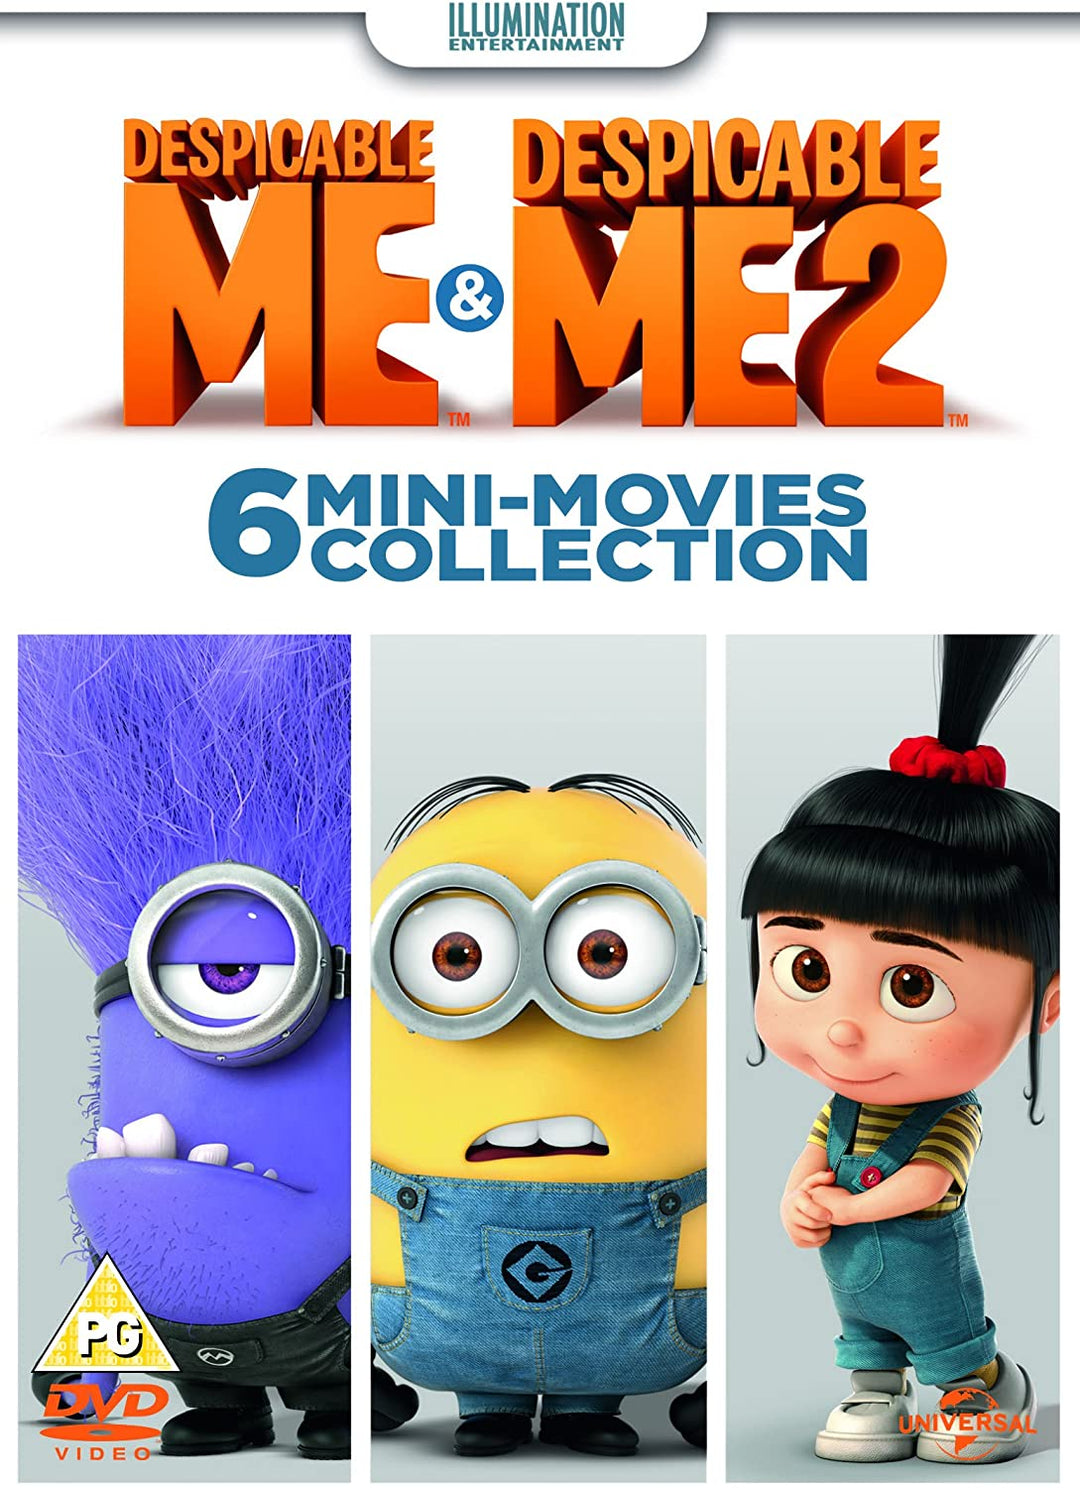 Despicable Me - 6 Mini-Movies Collection